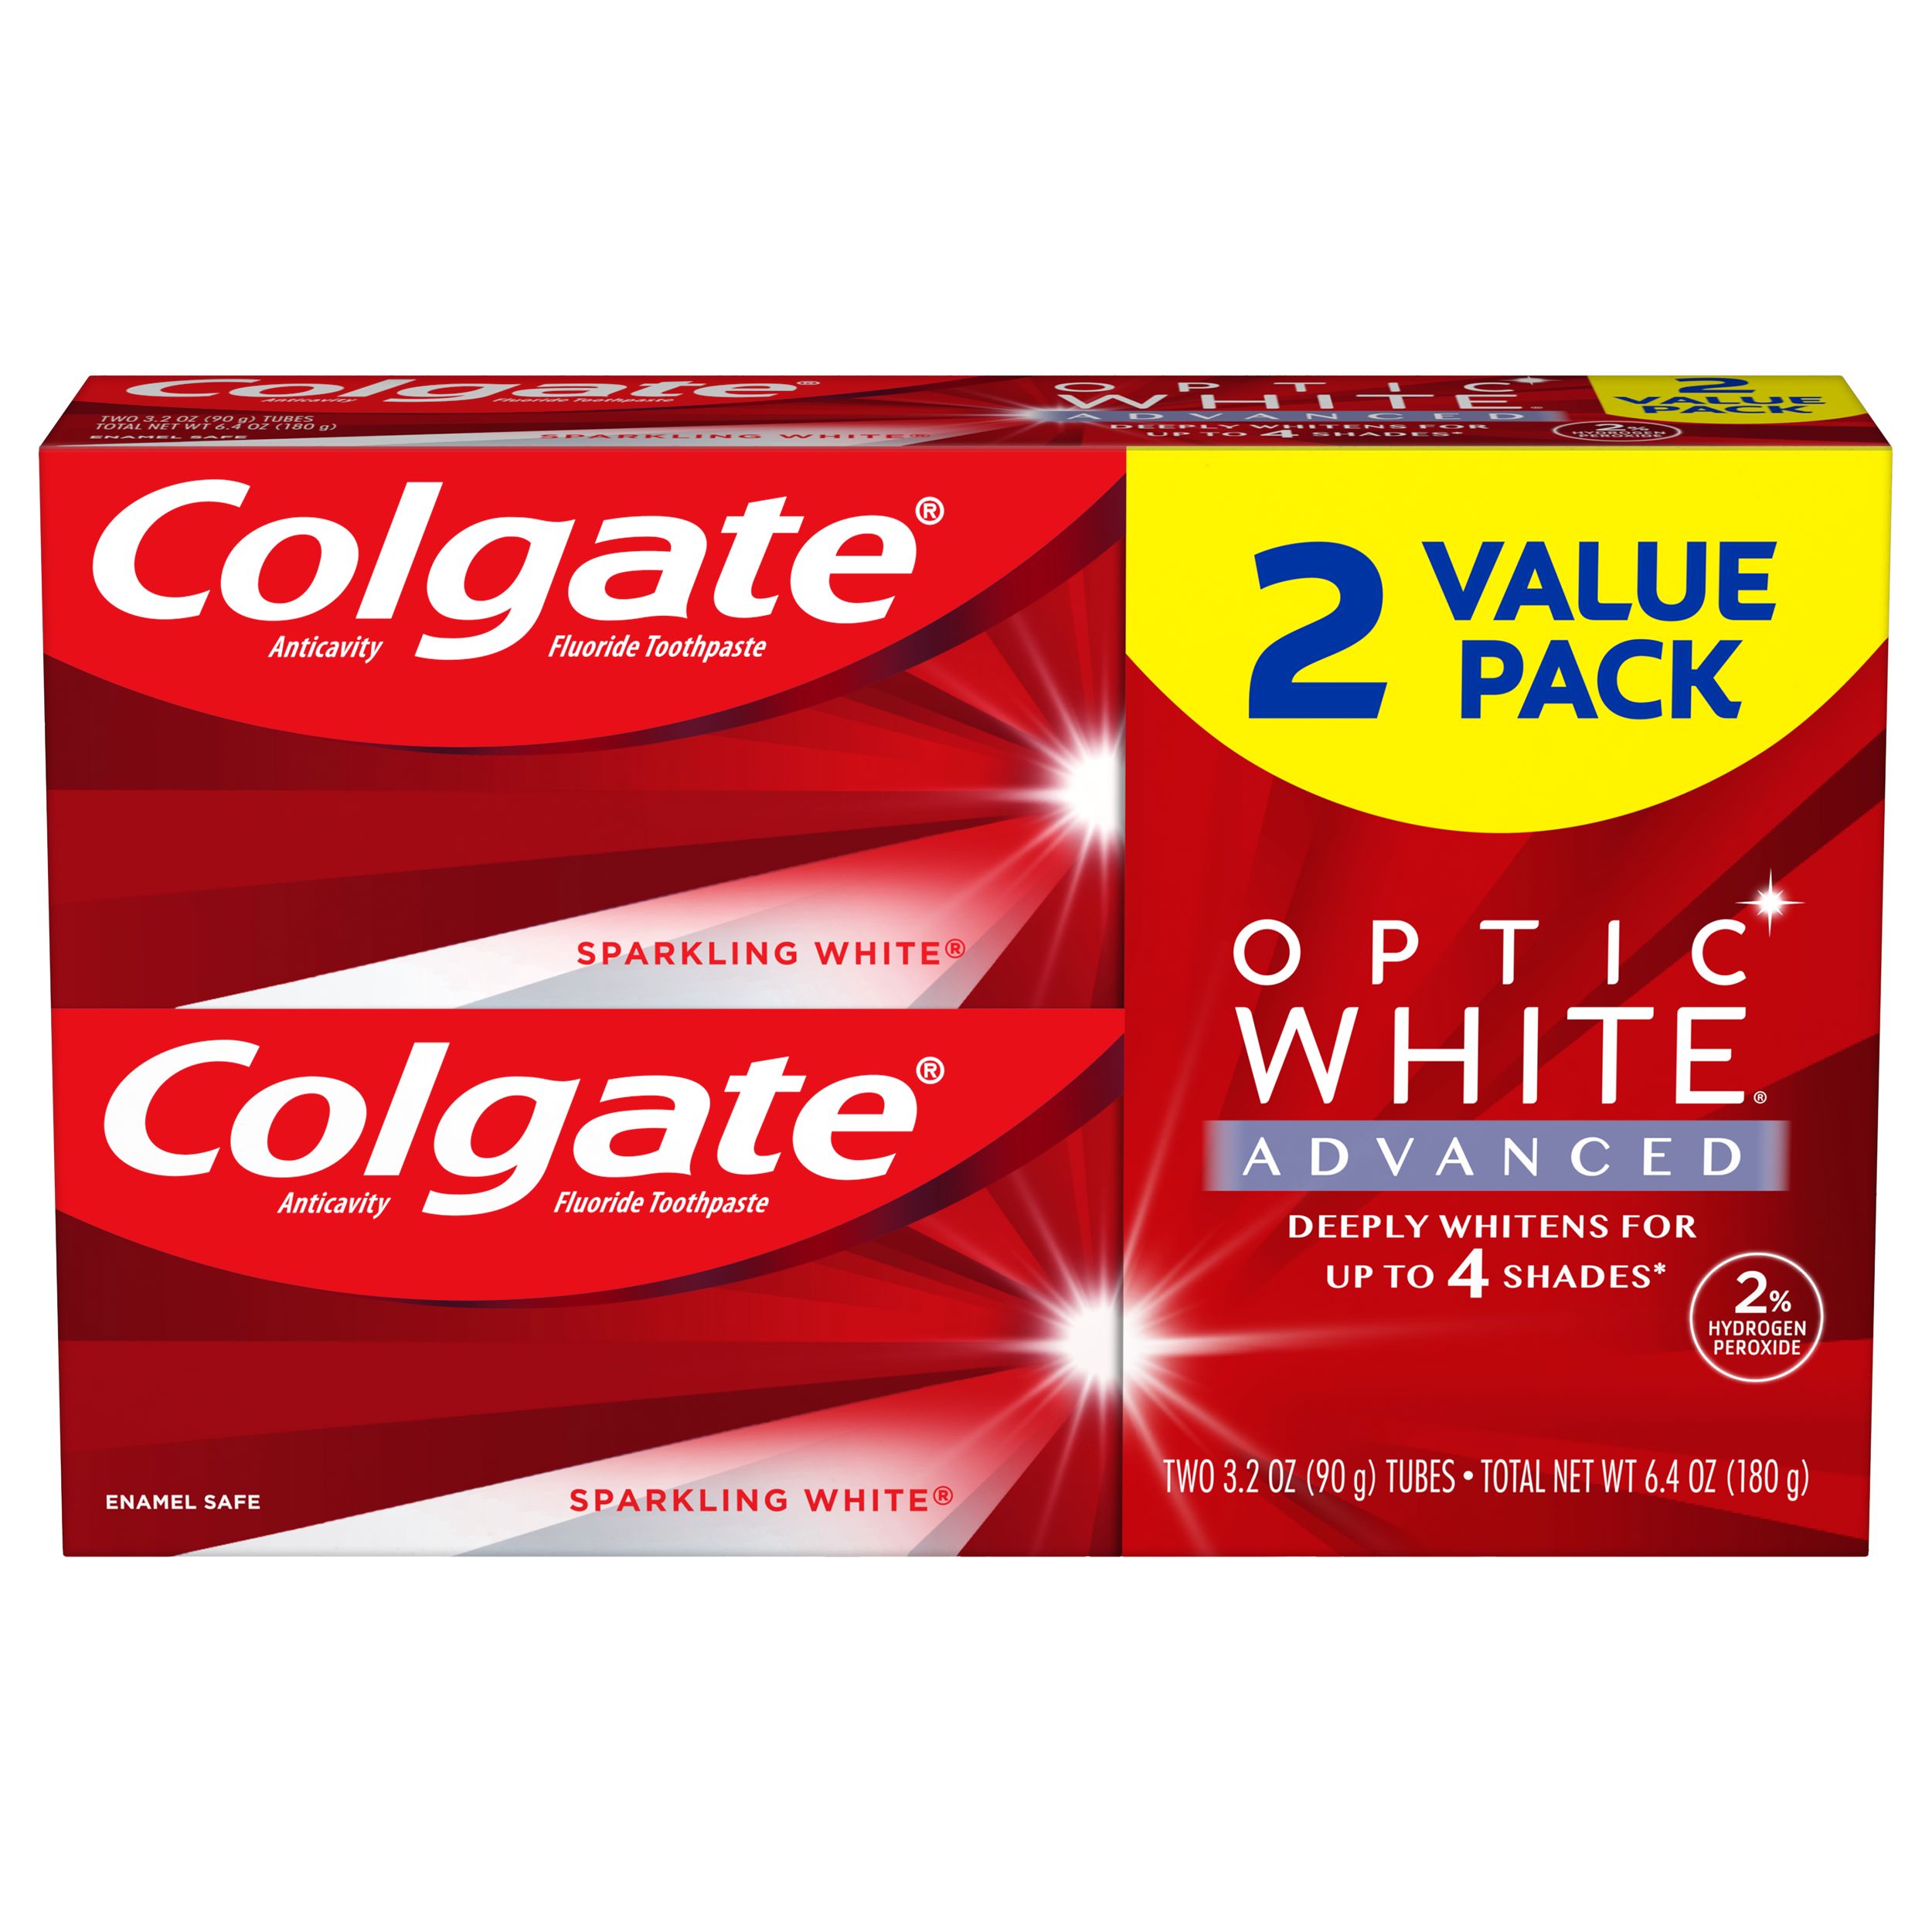 Detail Colgate Toothpaste Images Nomer 26